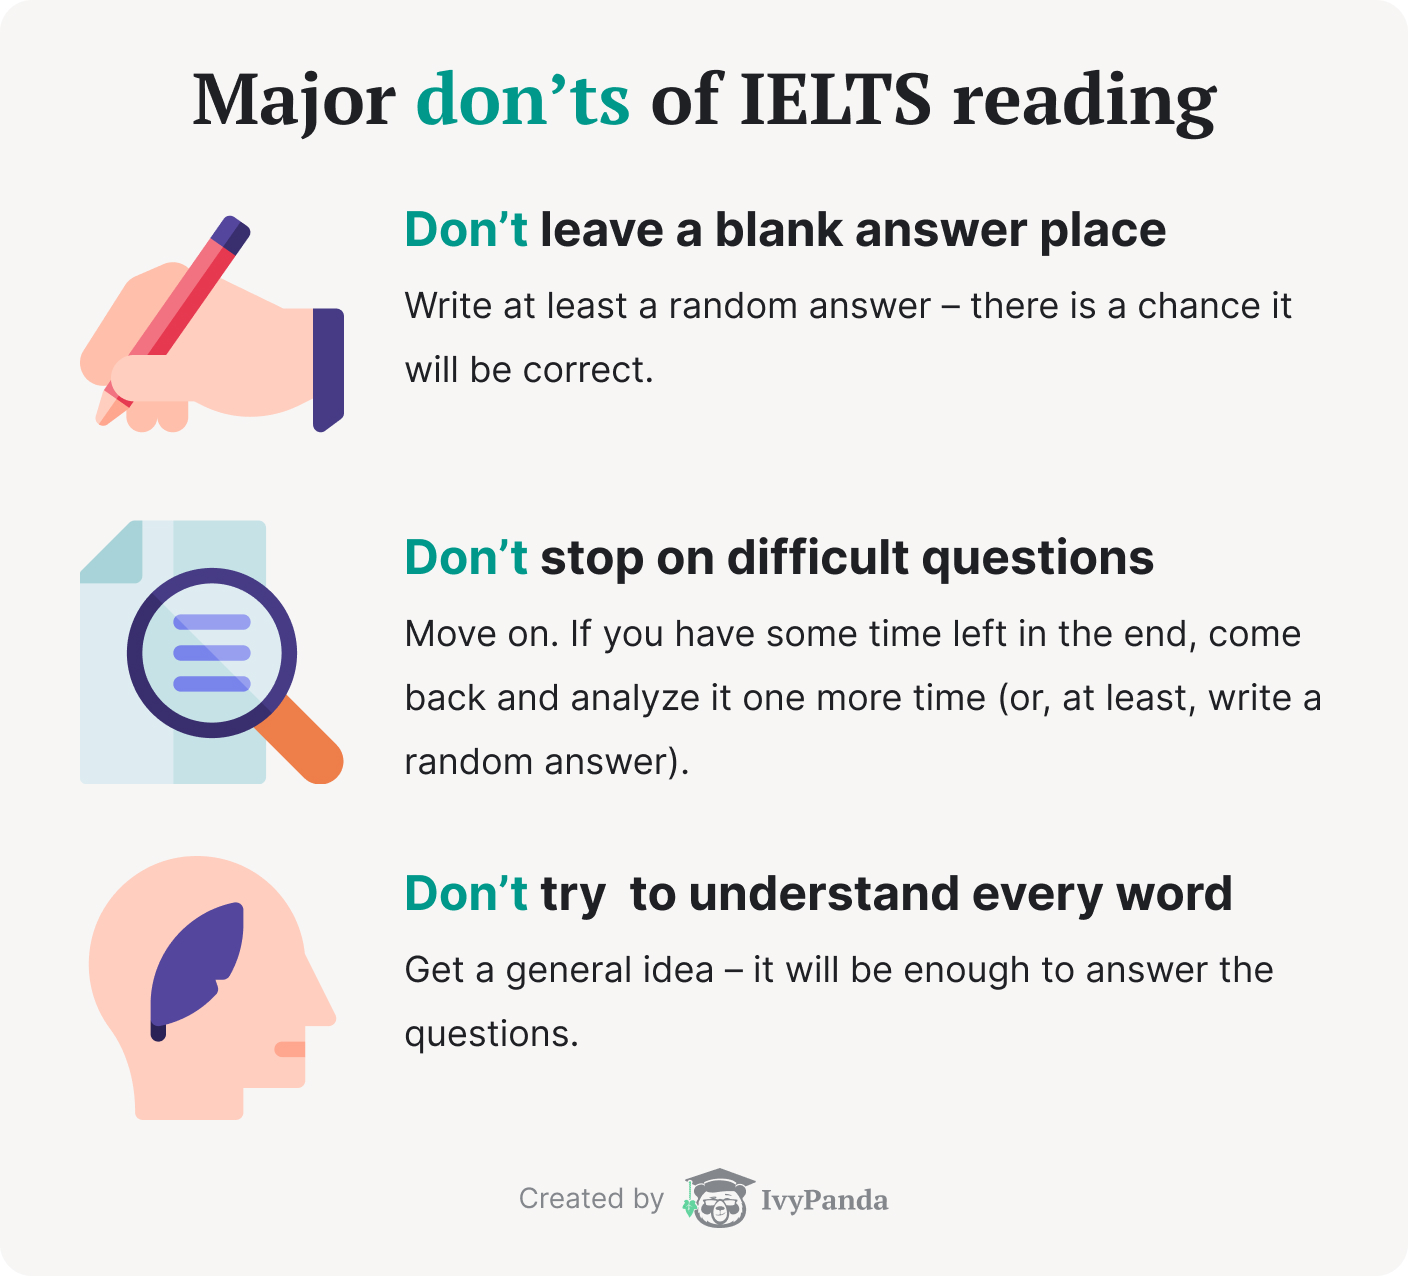 What a student cannot do during IELTS reading.